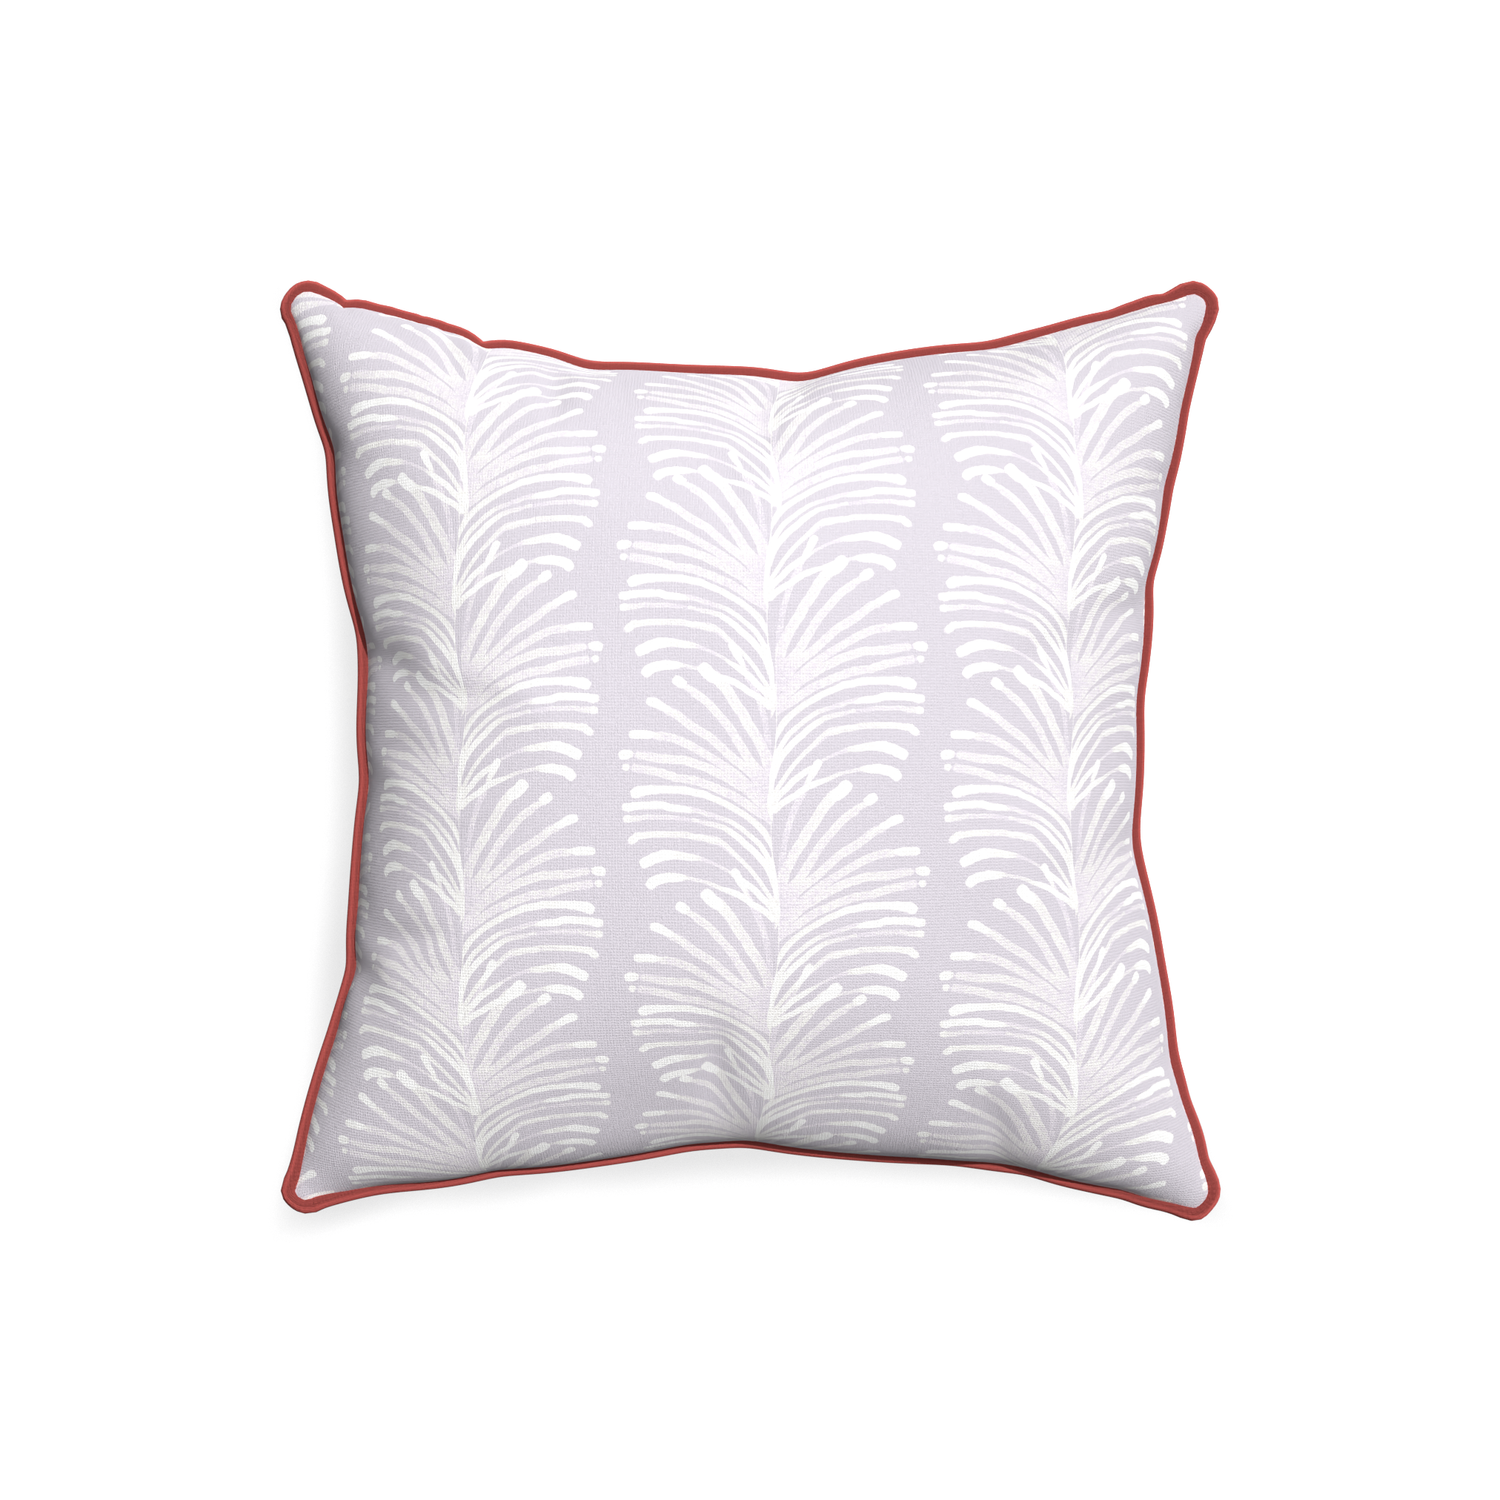 20-square emma lavender custom pillow with c piping on white background